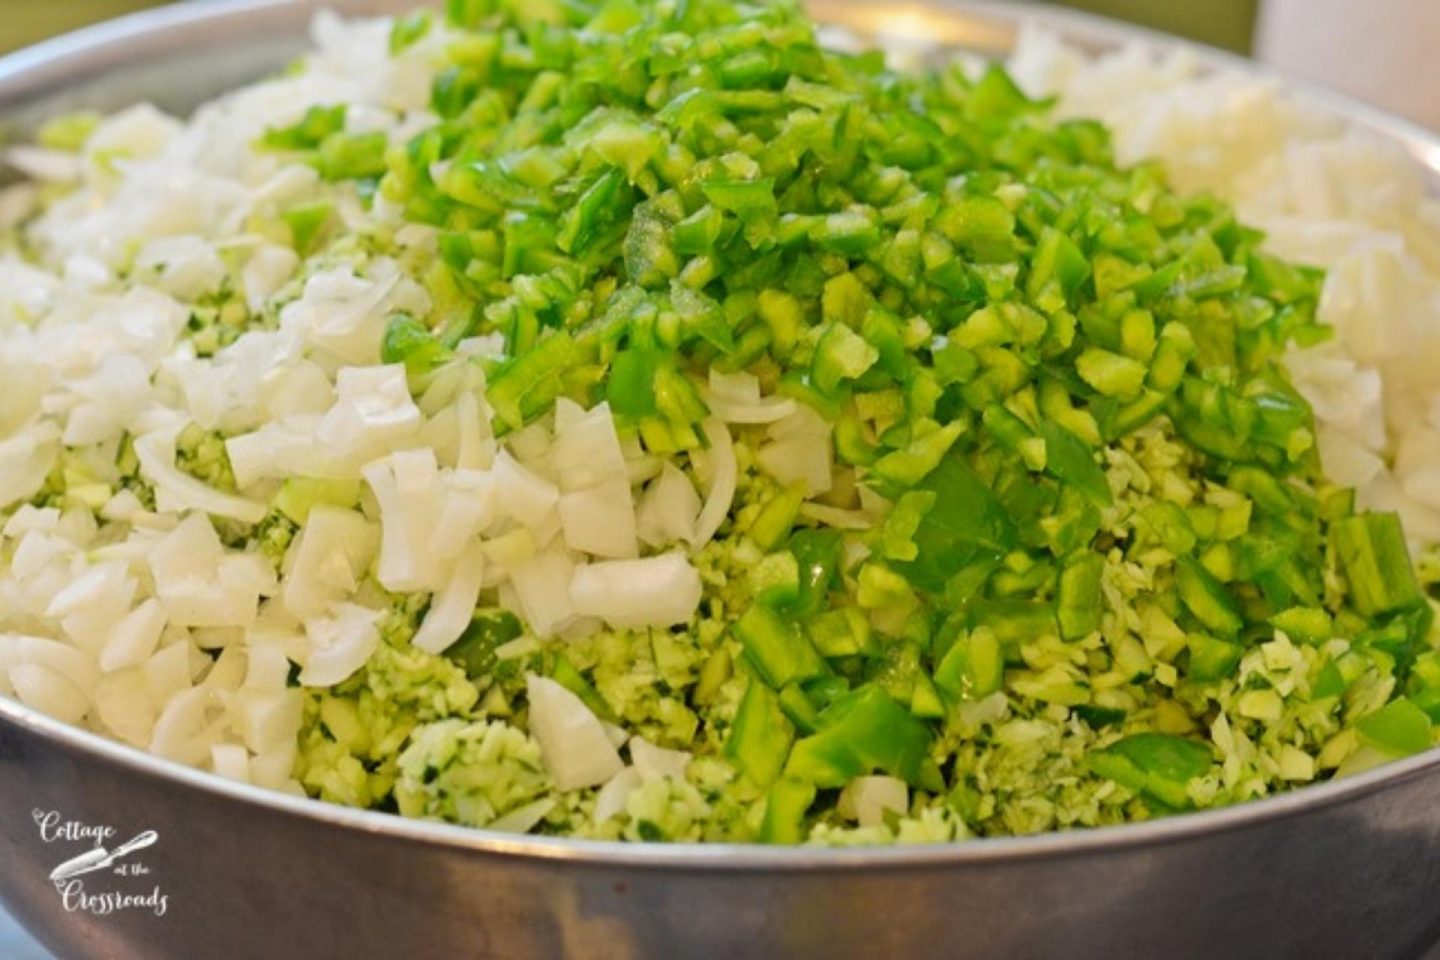 Mixture of cucumber with onions